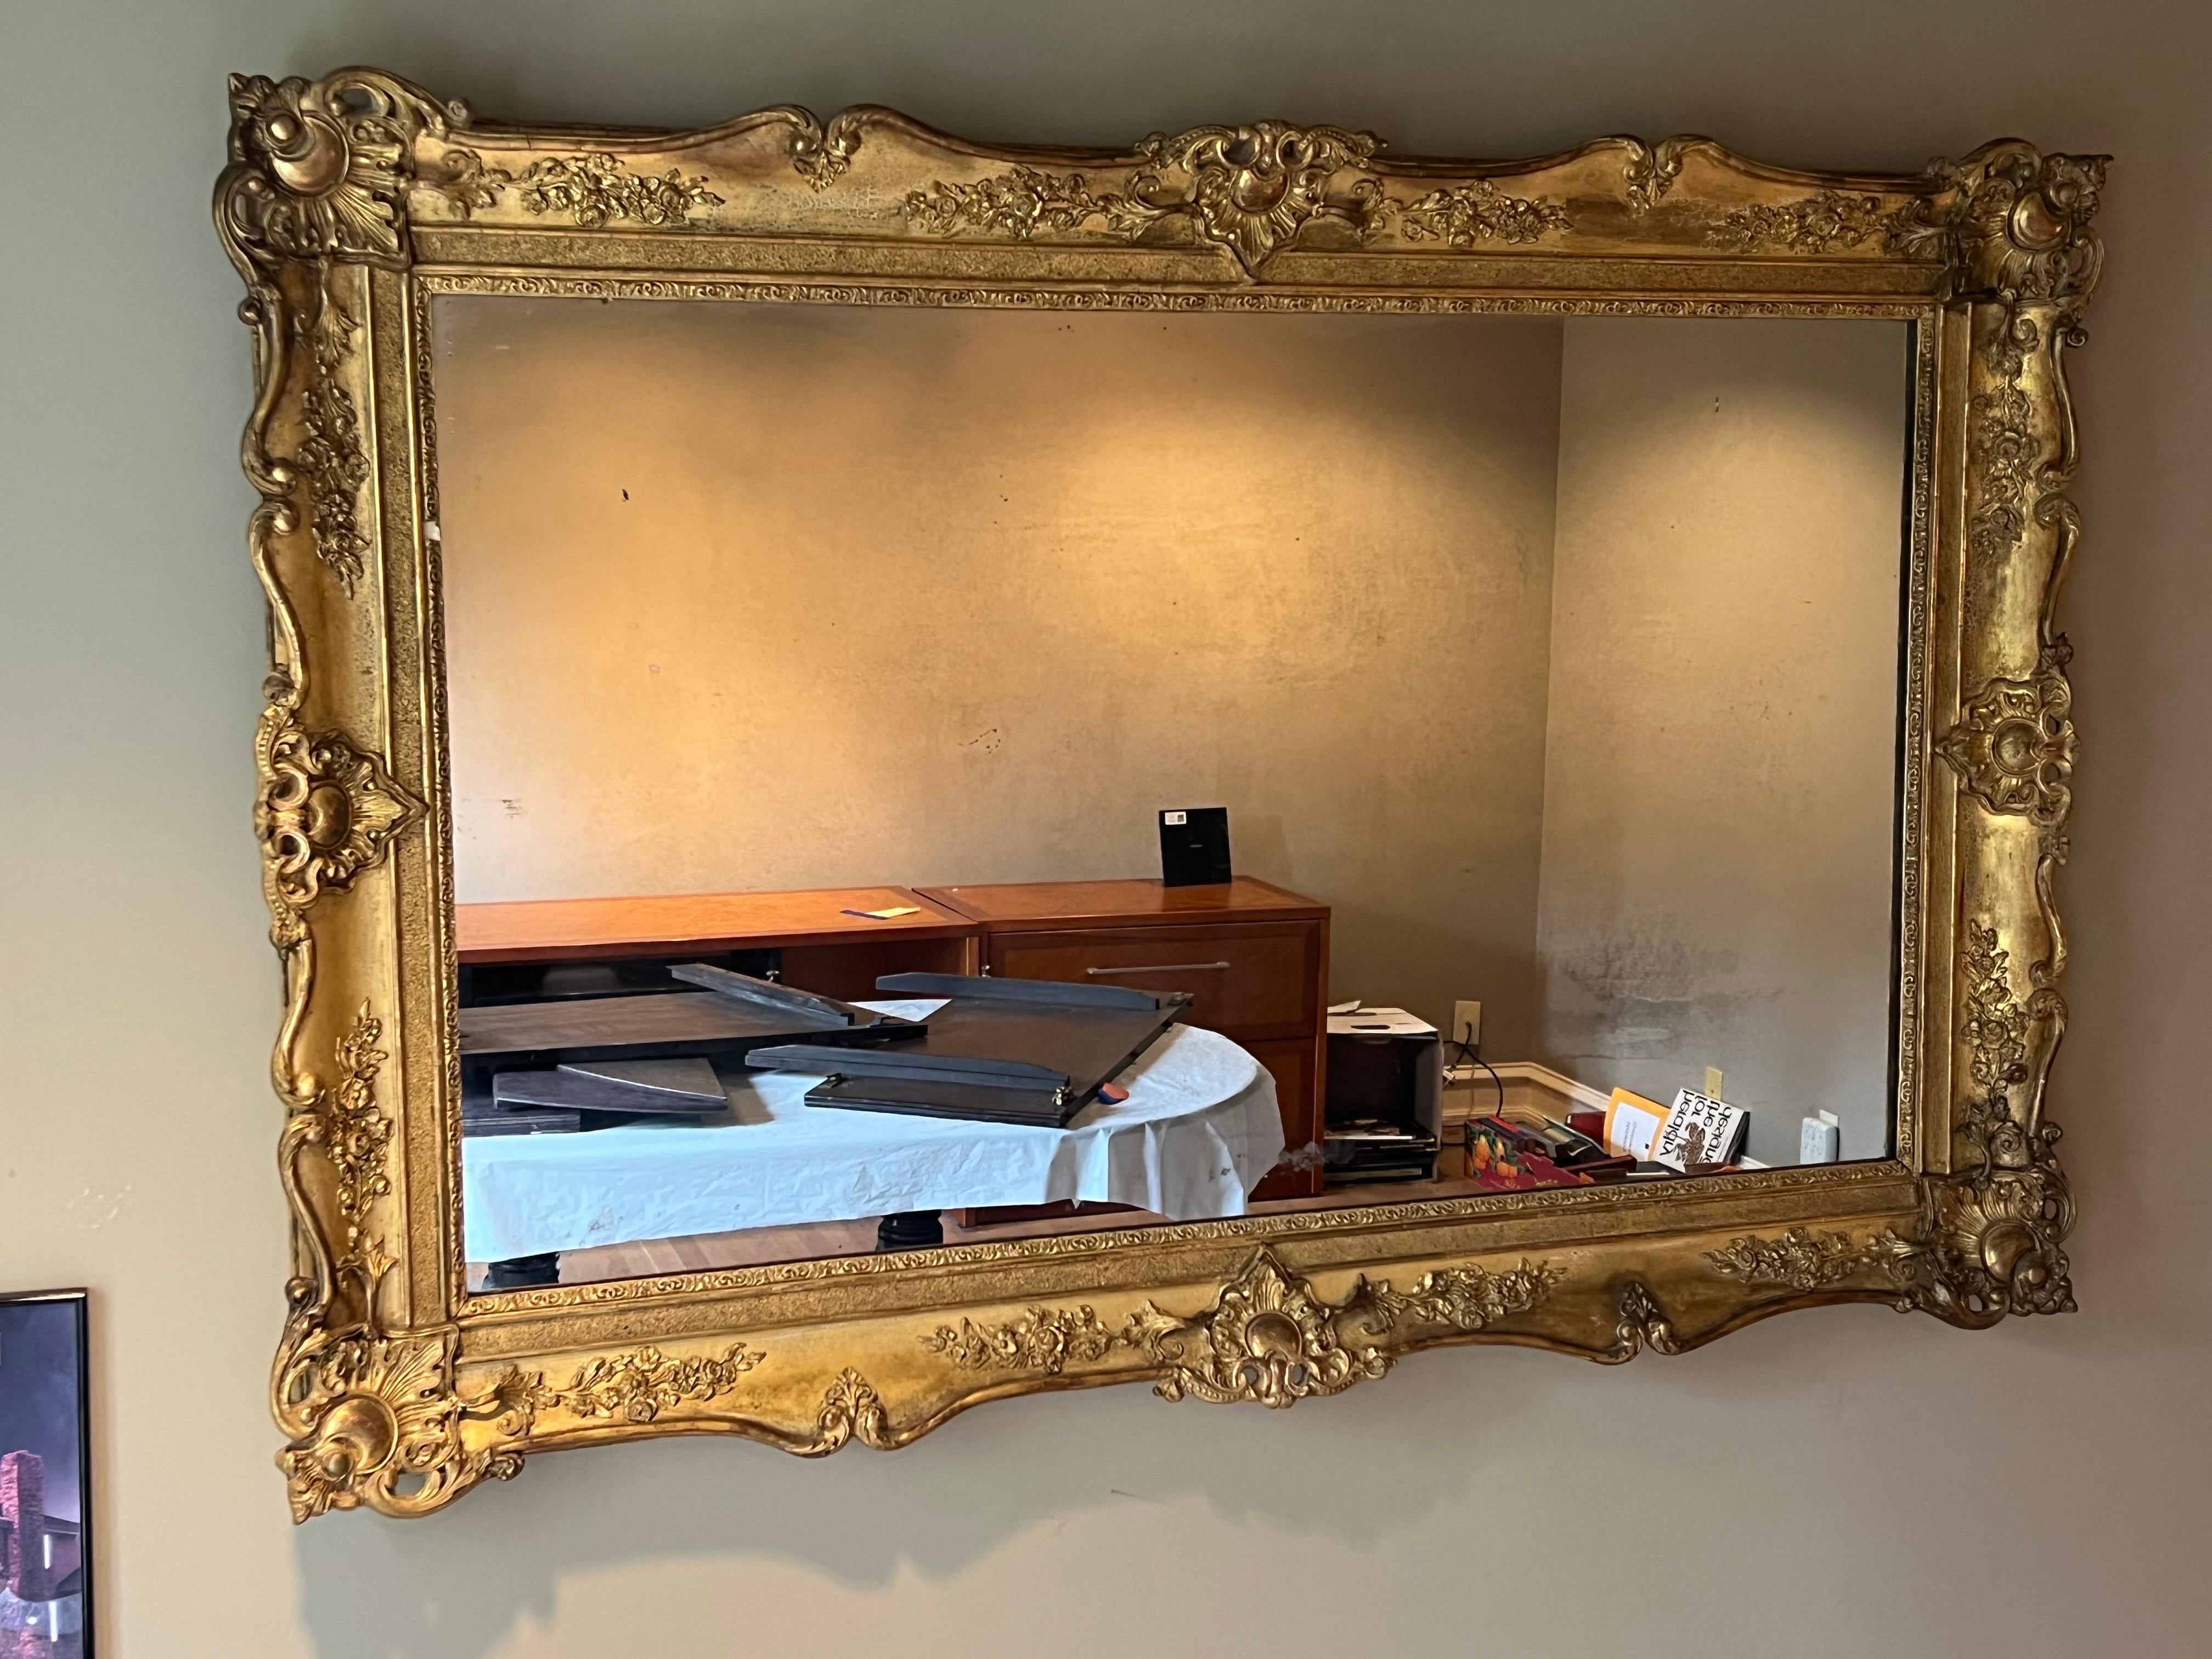 Alluring French Napoleon III giltwood mirror with lovely carved frame and trim. Having wonderful aged gilt finish, of desirable size and proportion, and with clean lines.